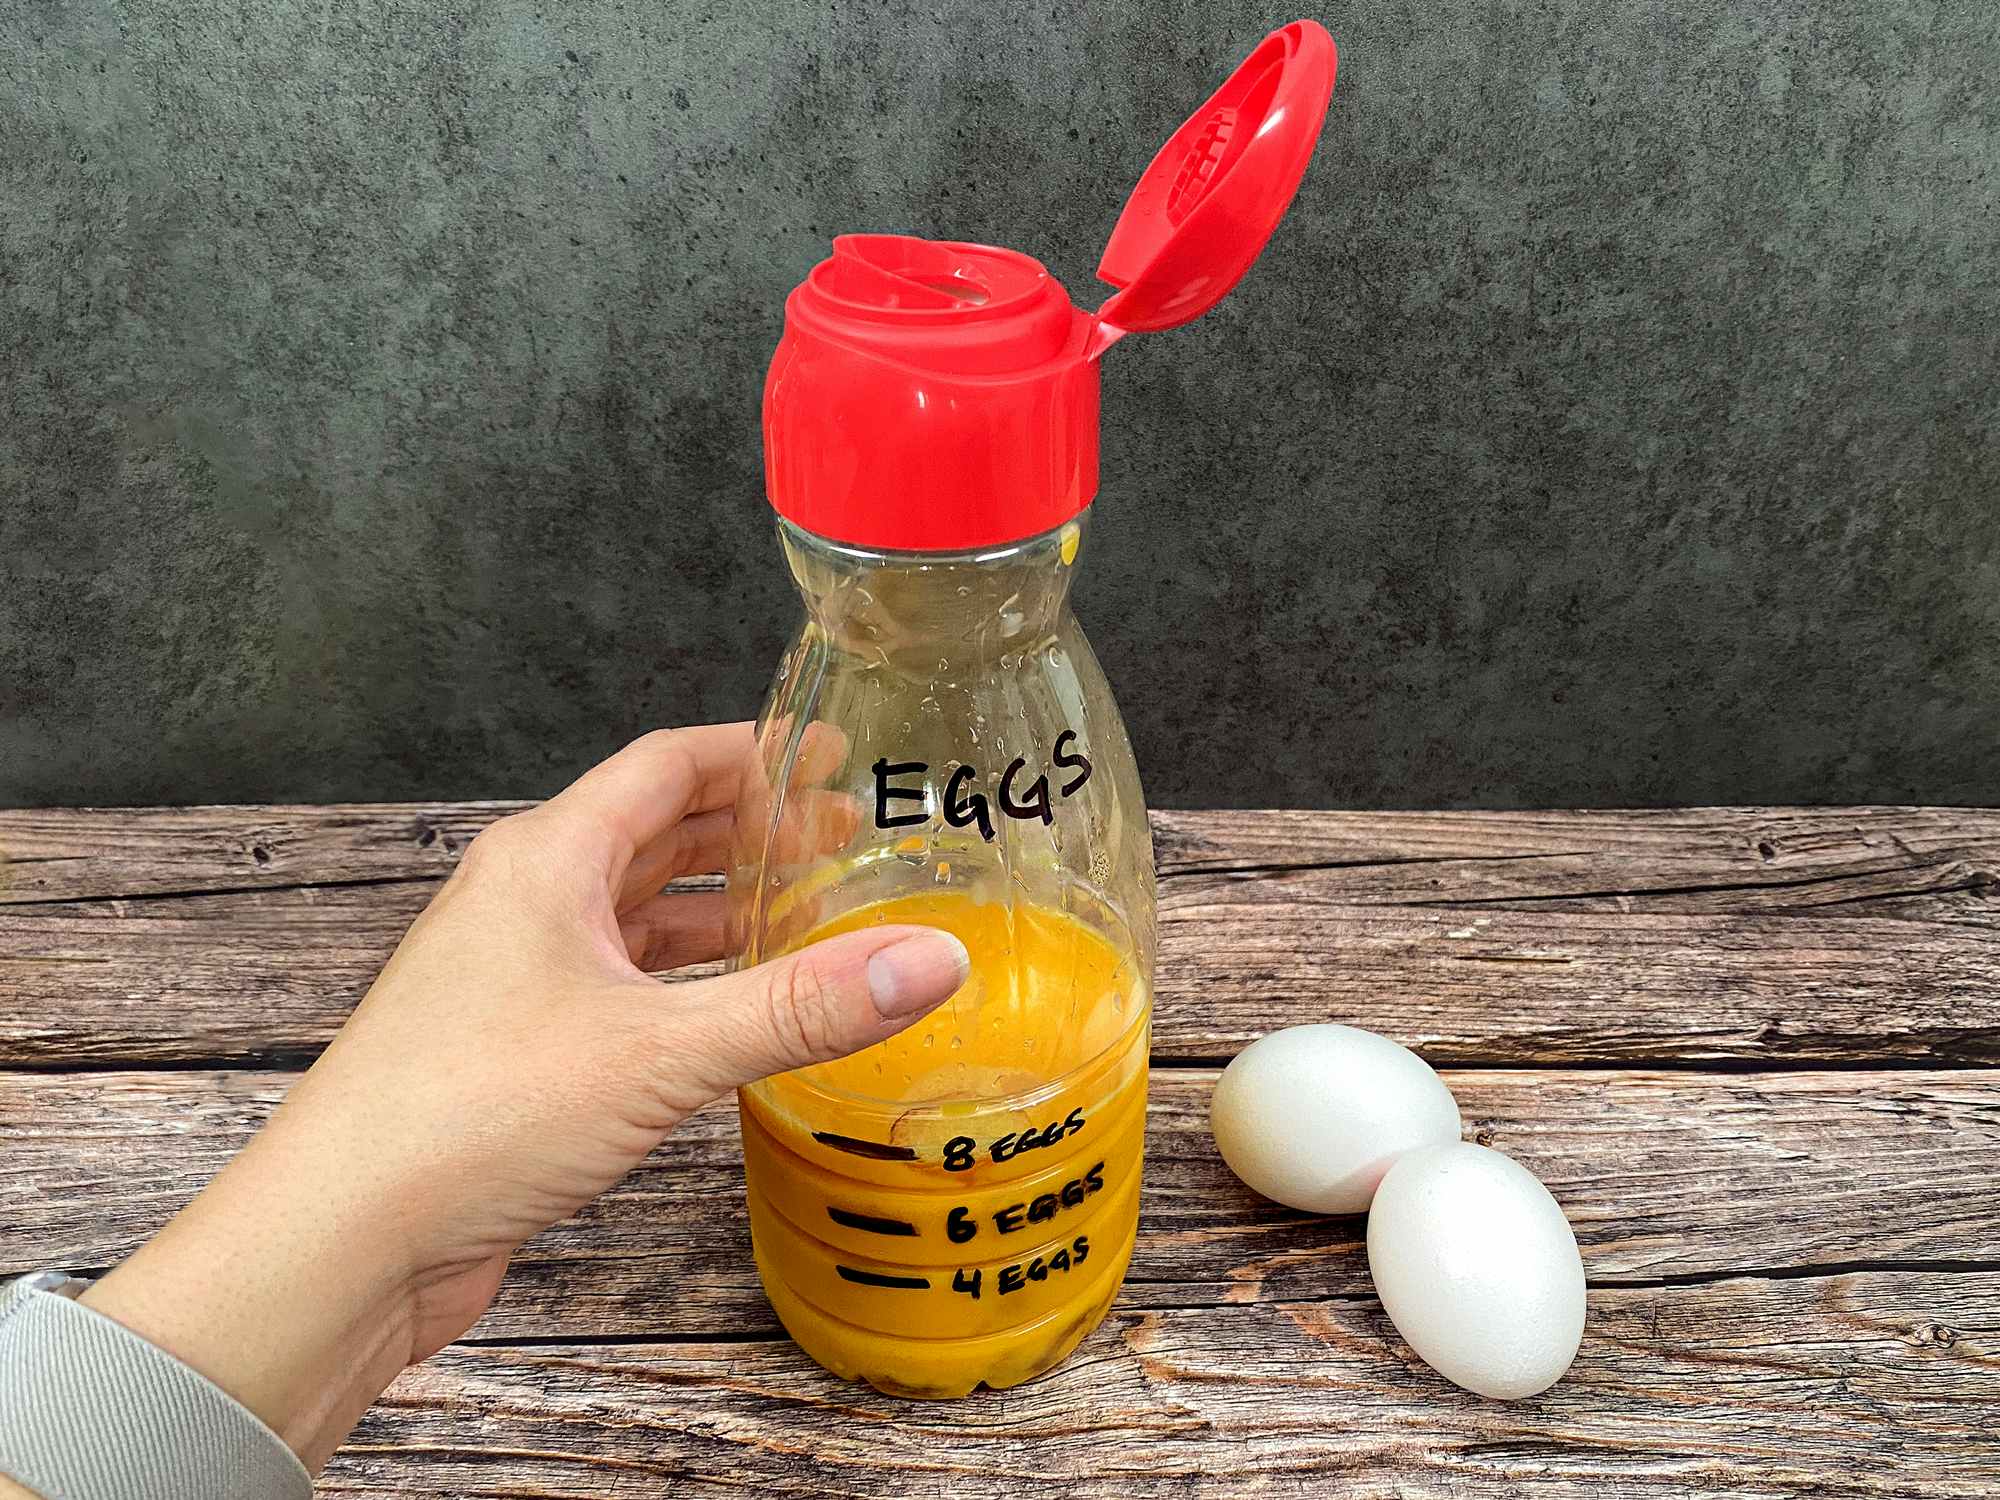 person grabbing a coffee creamer bottle filled with eggs for camping